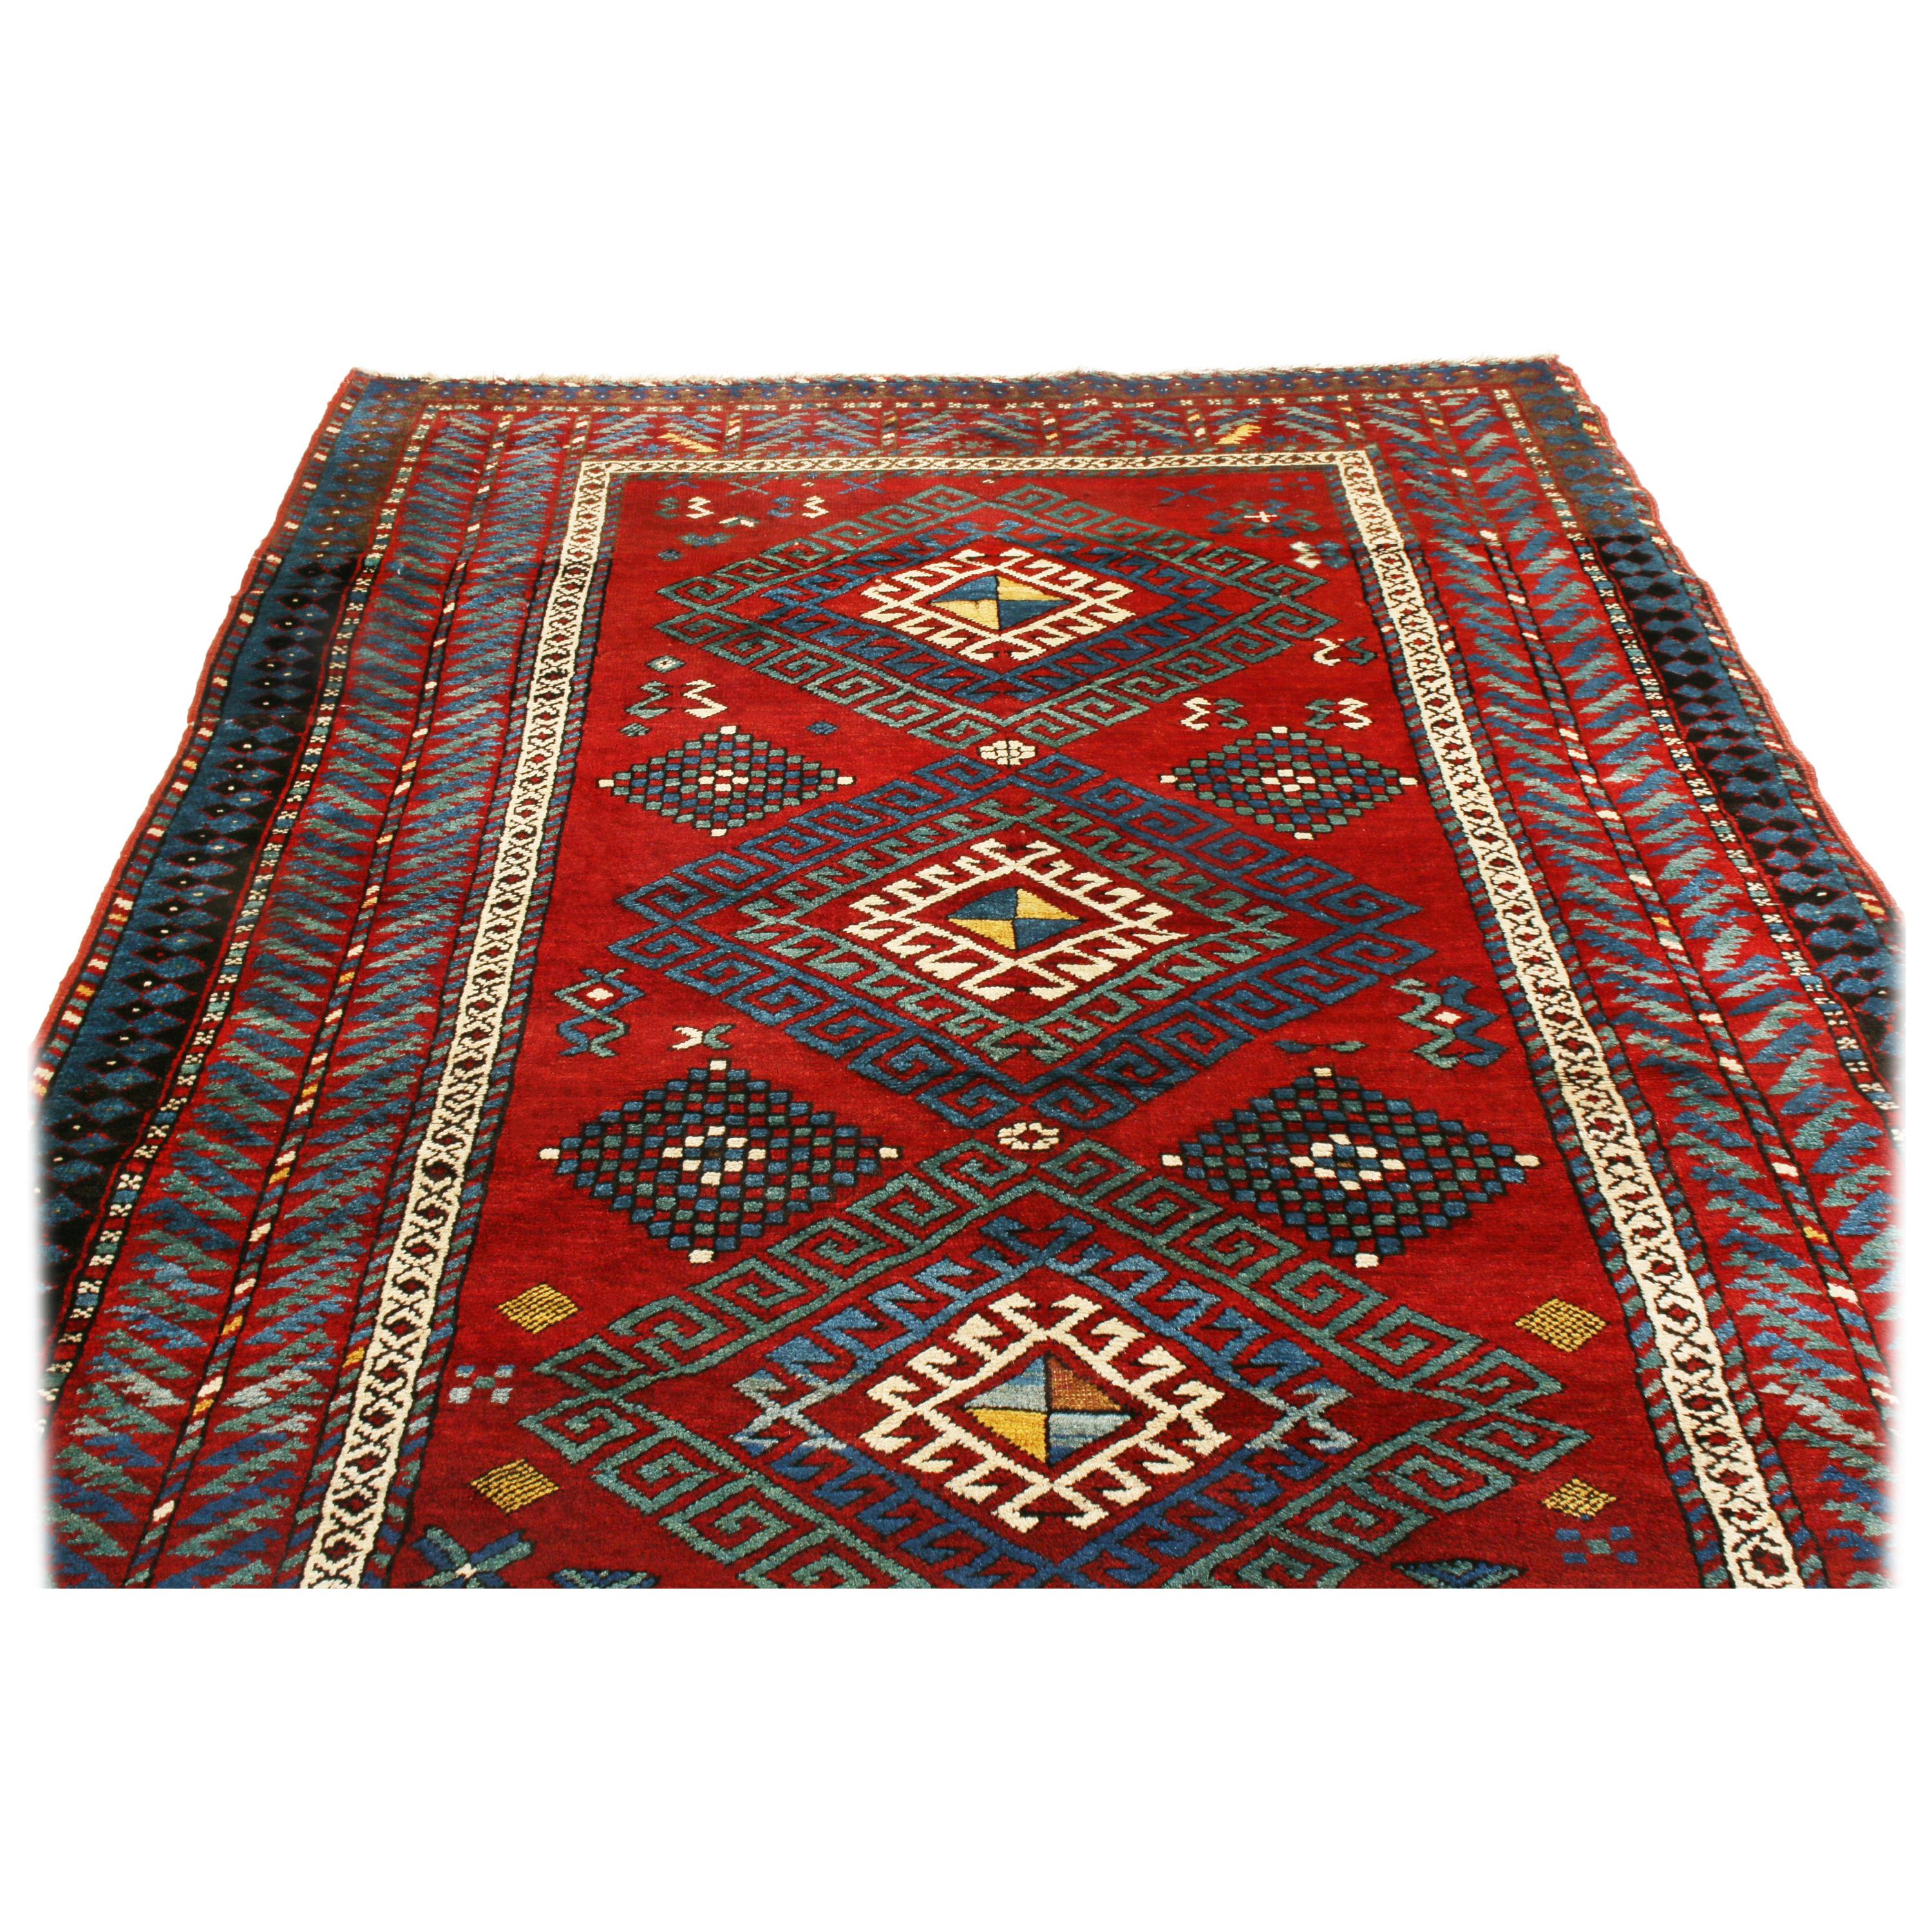 Antique Kazak Transitional Geometric Red and Blue Wool Rug with Dyrnak Guls